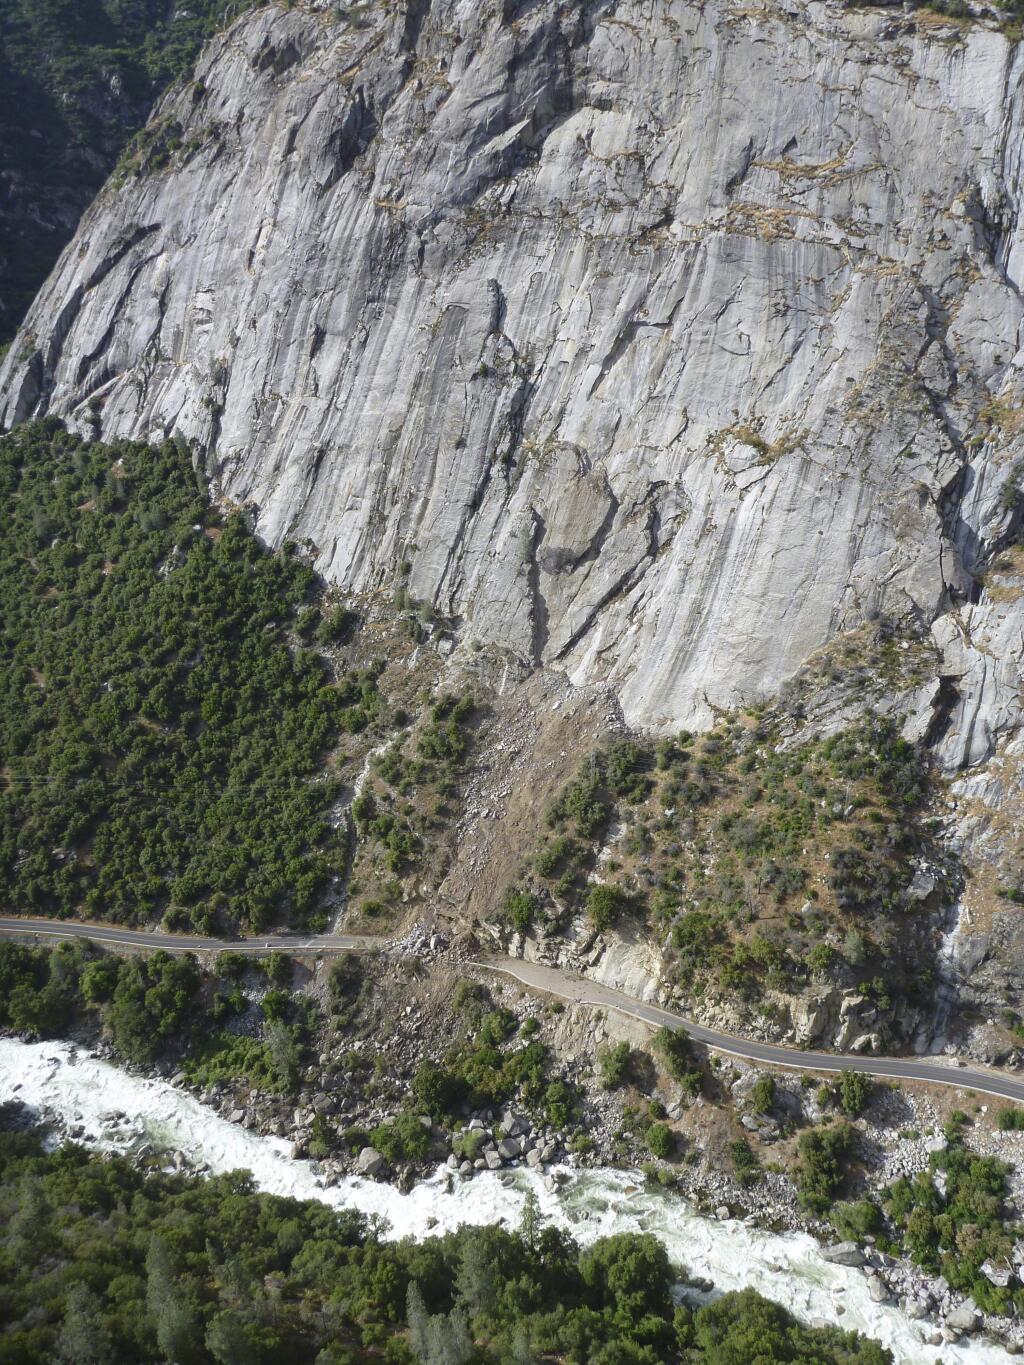 This Monday, June 12, 2017, photo provided by the National Park Service shows a rockslide that blocked one of the main roads into Yosemite National Park in California. About 4,000 tons (3,600 metric tons) of rock detached from a cliff on Monday, blocking El Portal Road, Park spokesman Scott Gediman. (NPS Photo via AP)